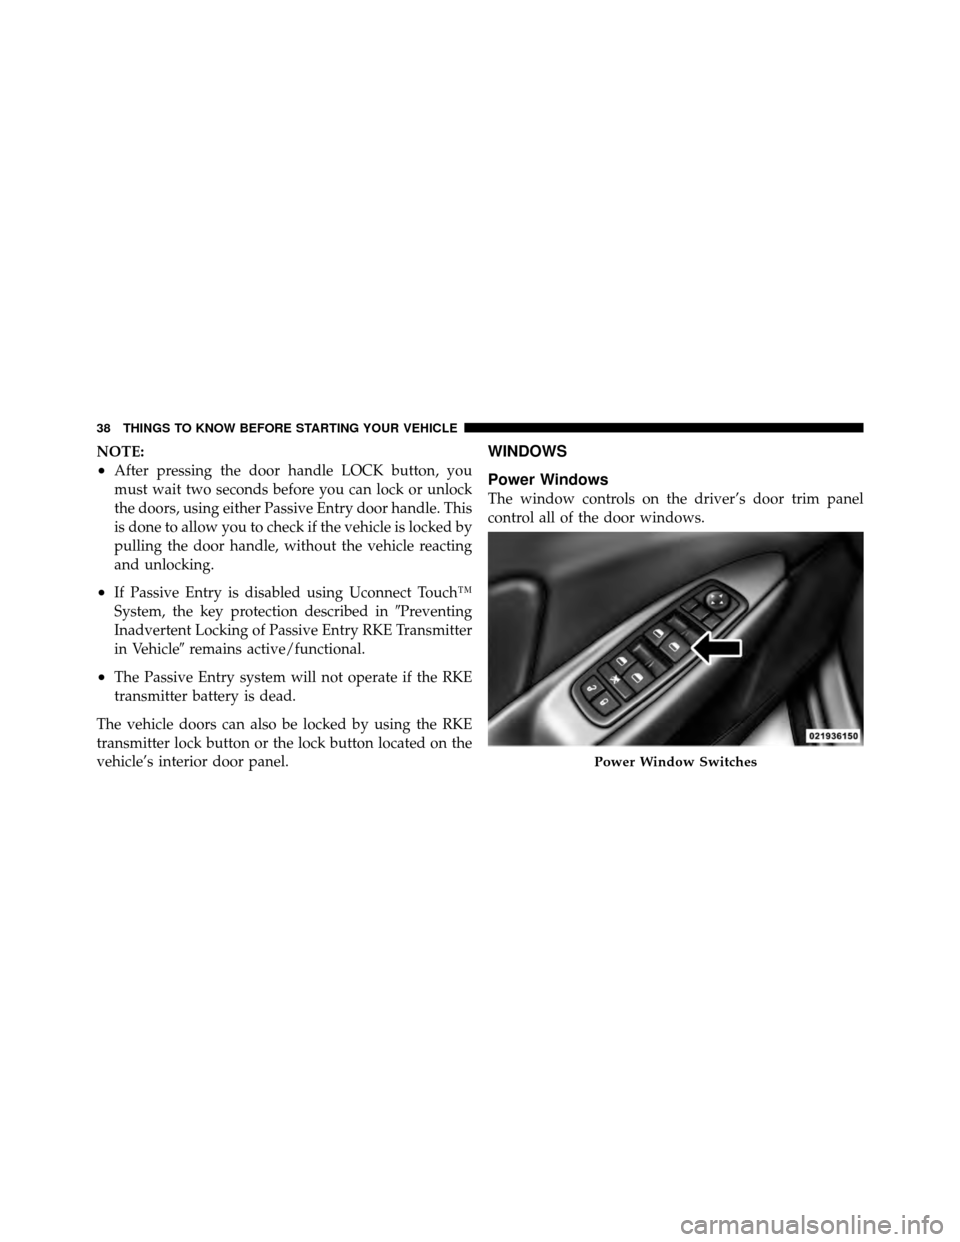 DODGE JOURNEY 2012 1.G Owners Guide NOTE:
•After pressing the door handle LOCK button, you
must wait two seconds before you can lock or unlock
the doors, using either Passive Entry door handle. This
is done to allow you to check if th